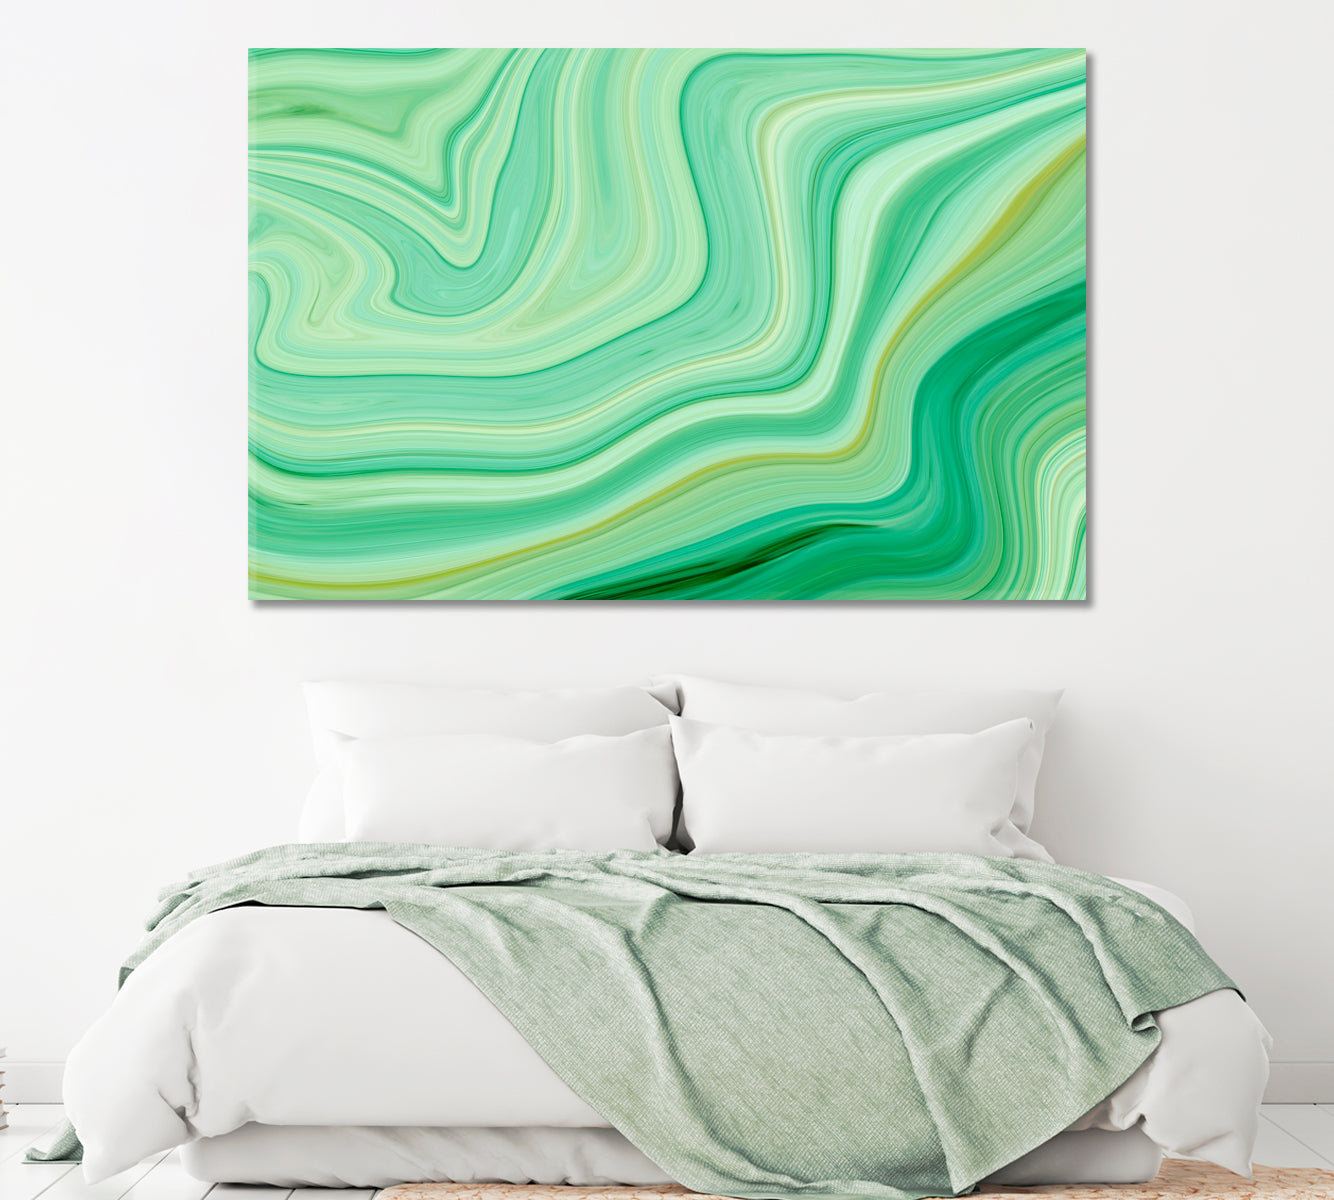 Green Marble Ink Design Canvas Print ArtLexy 1 Panel 24"x16" inches 